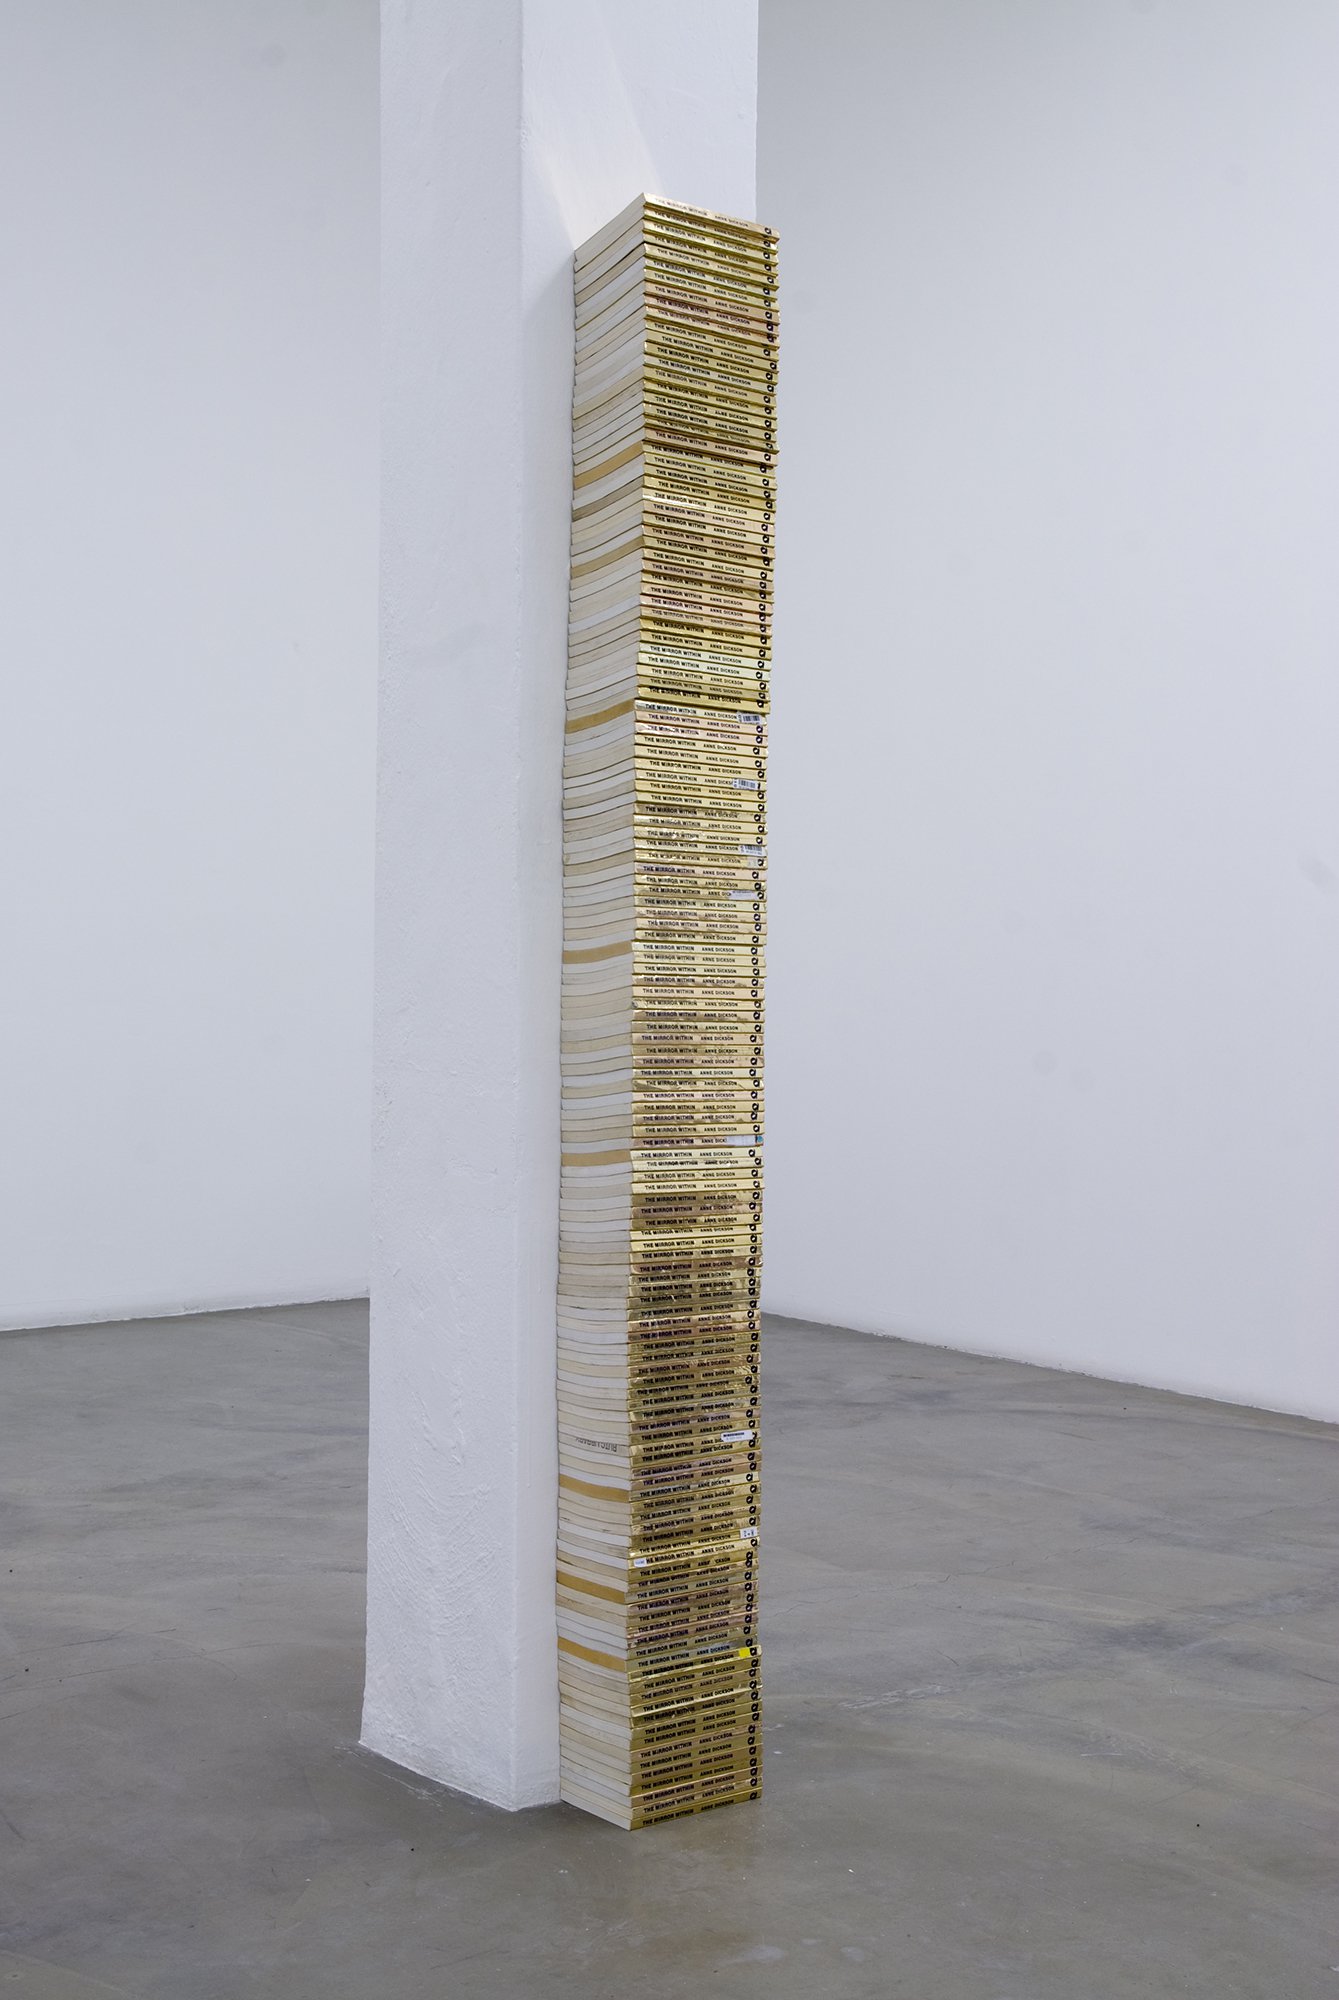 James Richards, Untitled (The Mirror Within), stacked second hand books, 180 x 19,5 × 13 cm, 2010-2011. Installation view, James Richards, Rodeo, Istanbul, 2011